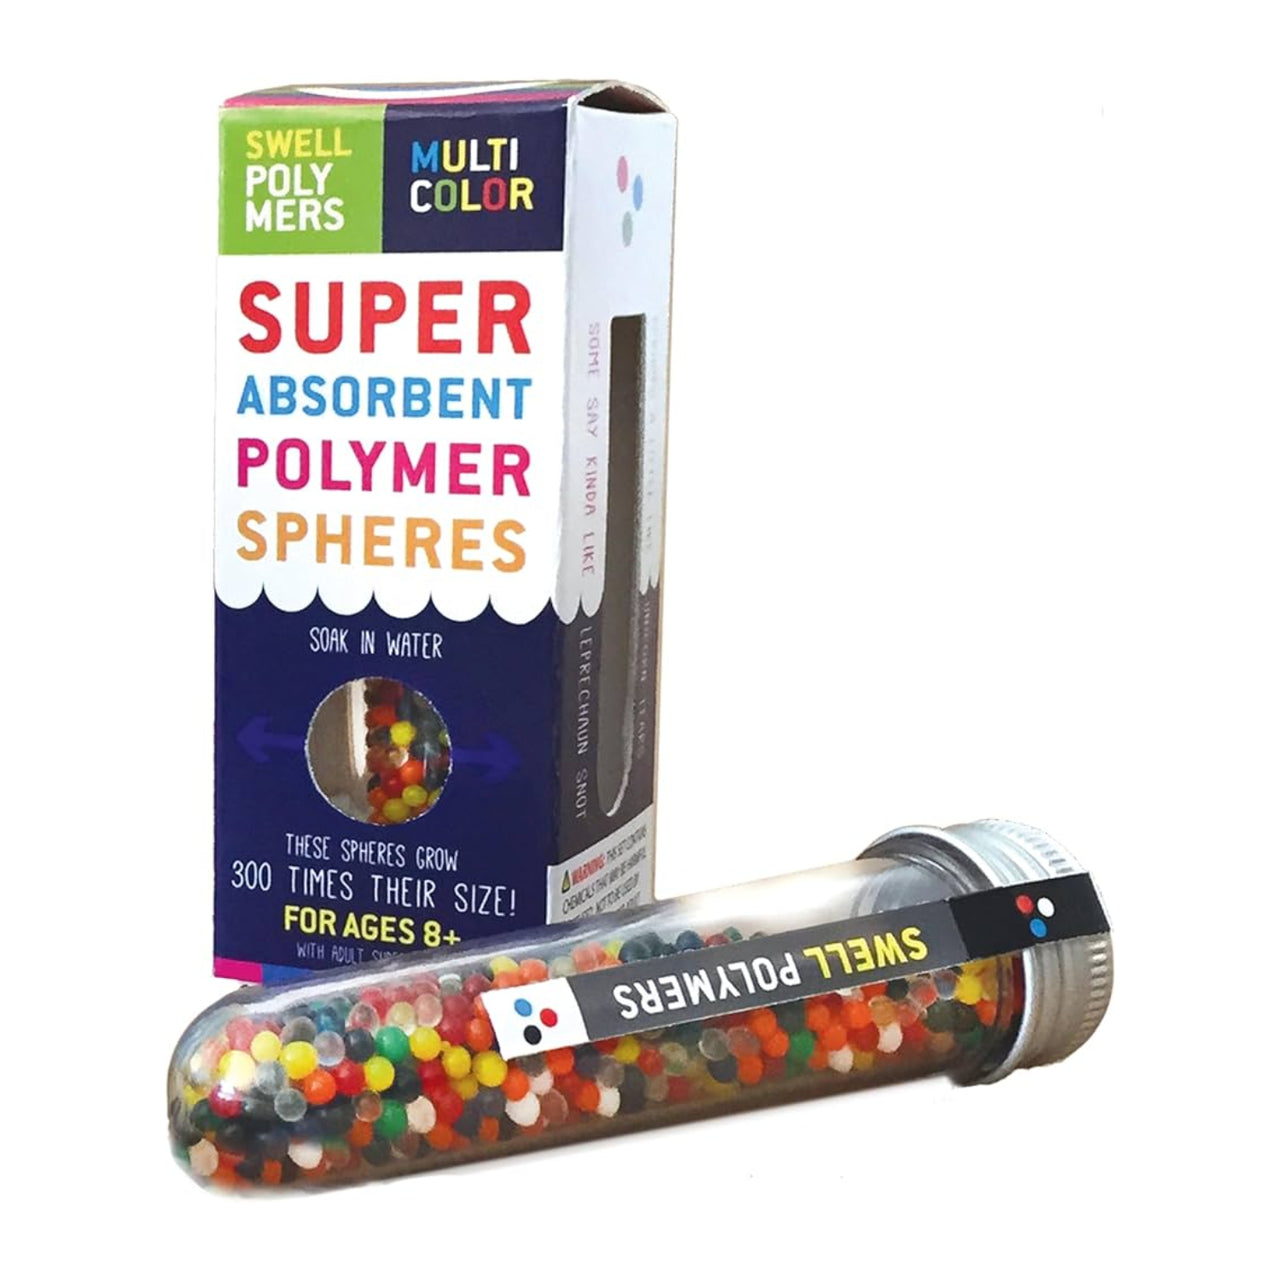 Swell Polymer Multi-Colored Spheres